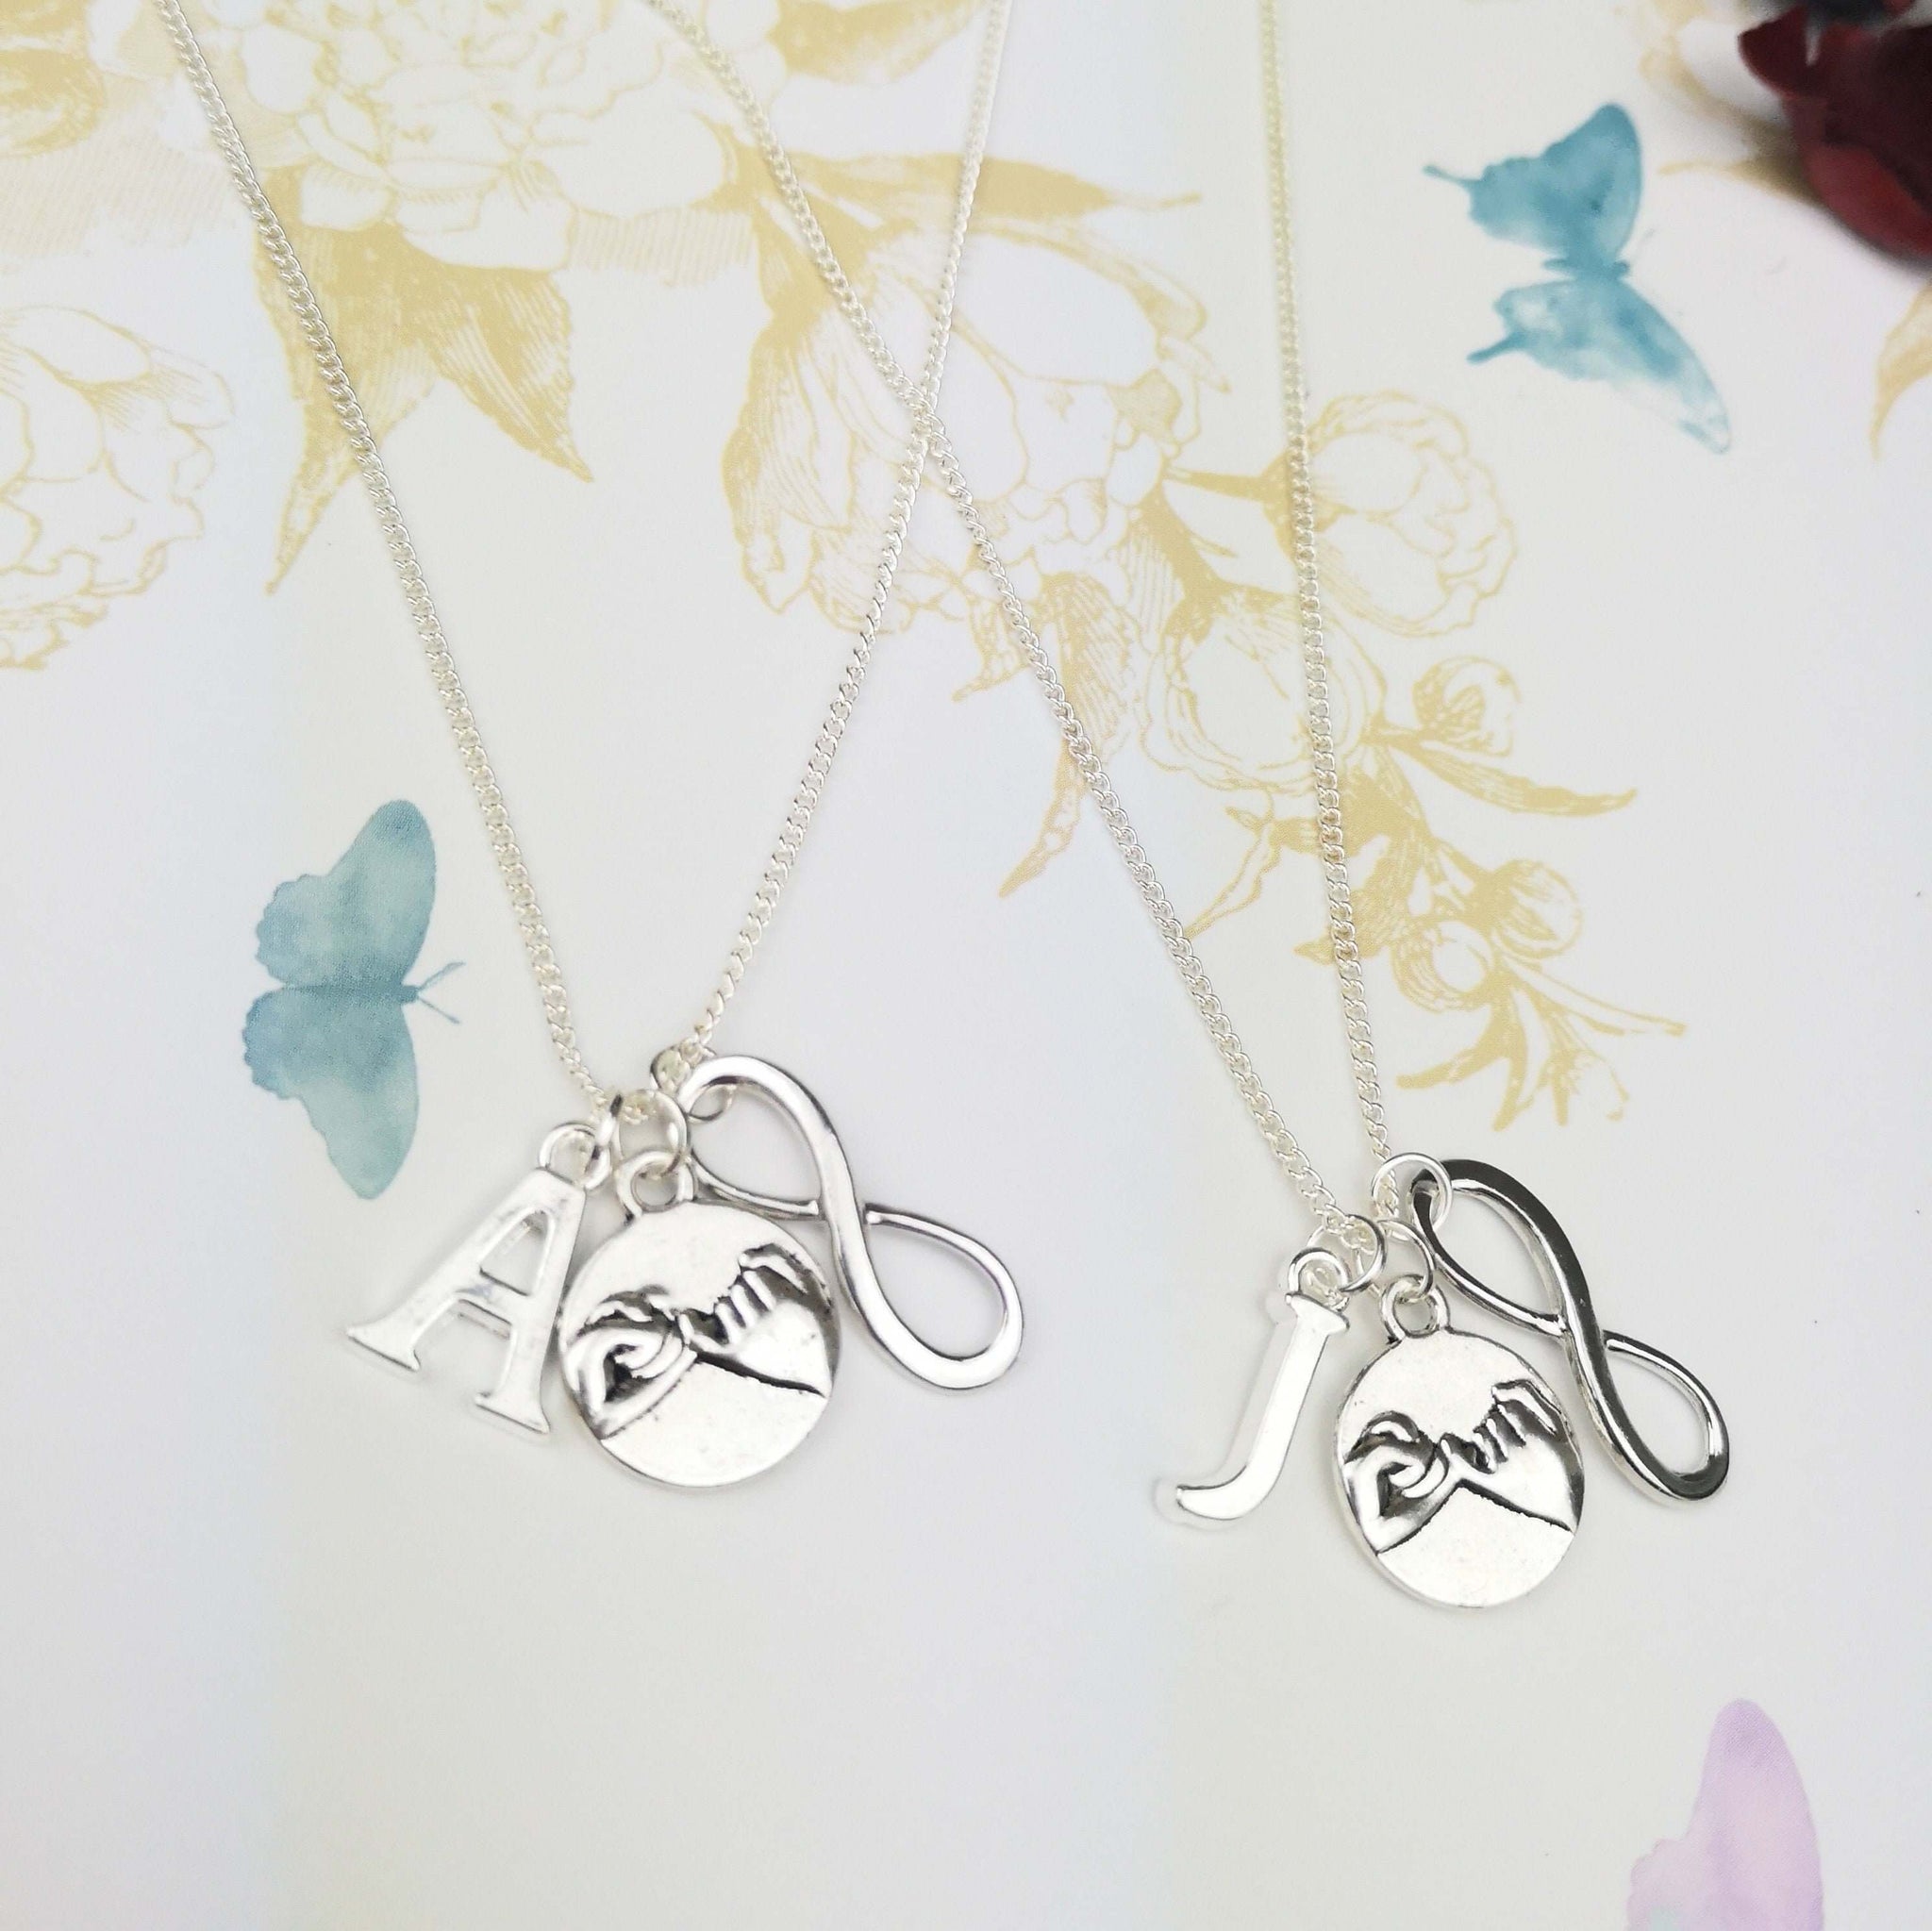 Pinky promise personalised necklaces set of 2